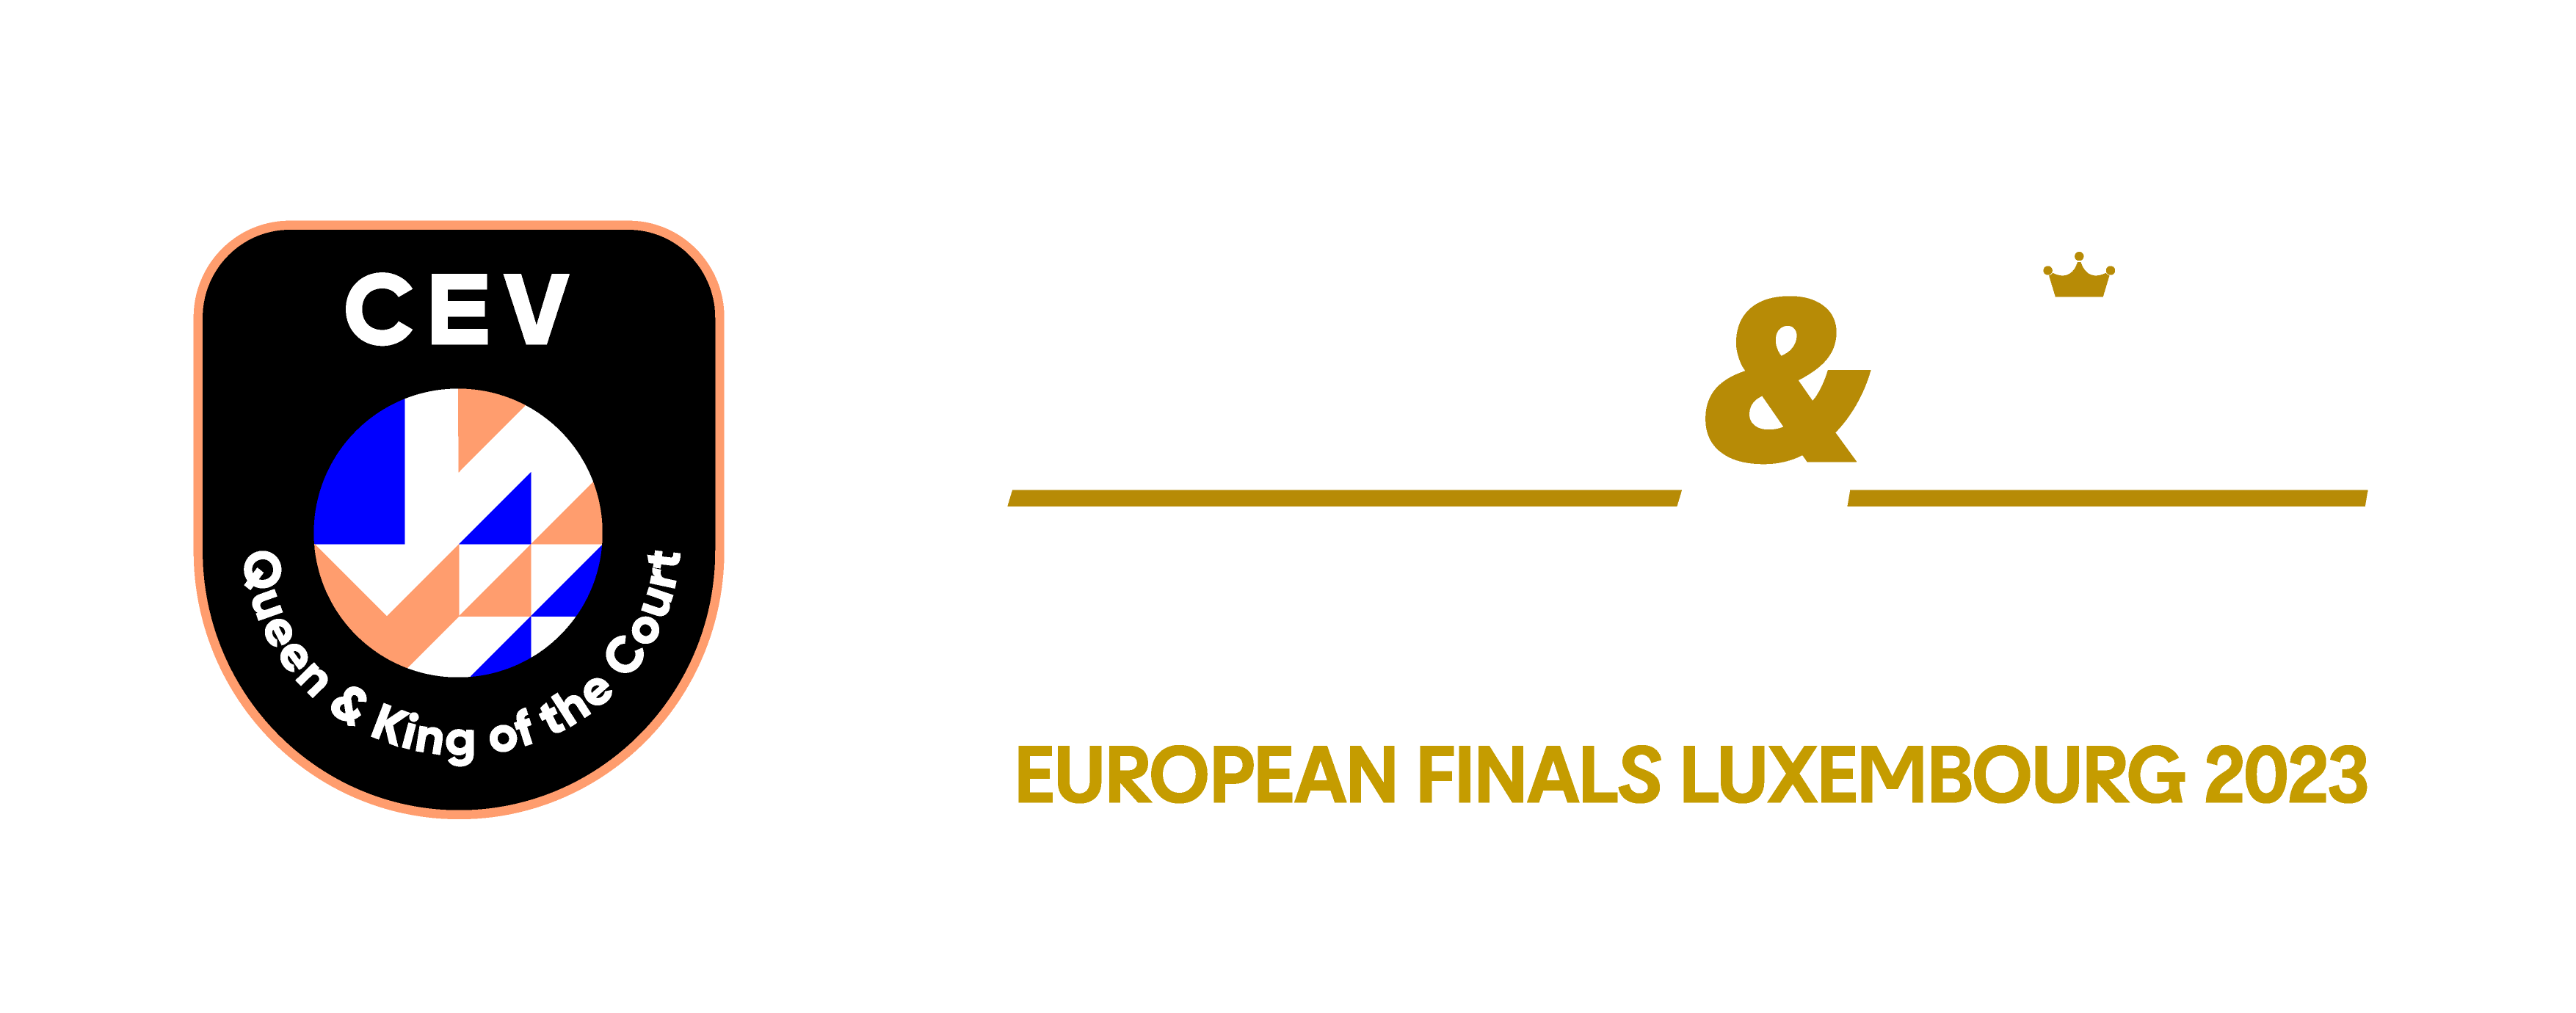 First-ever Queen & King of the Court European Finals unveiled in